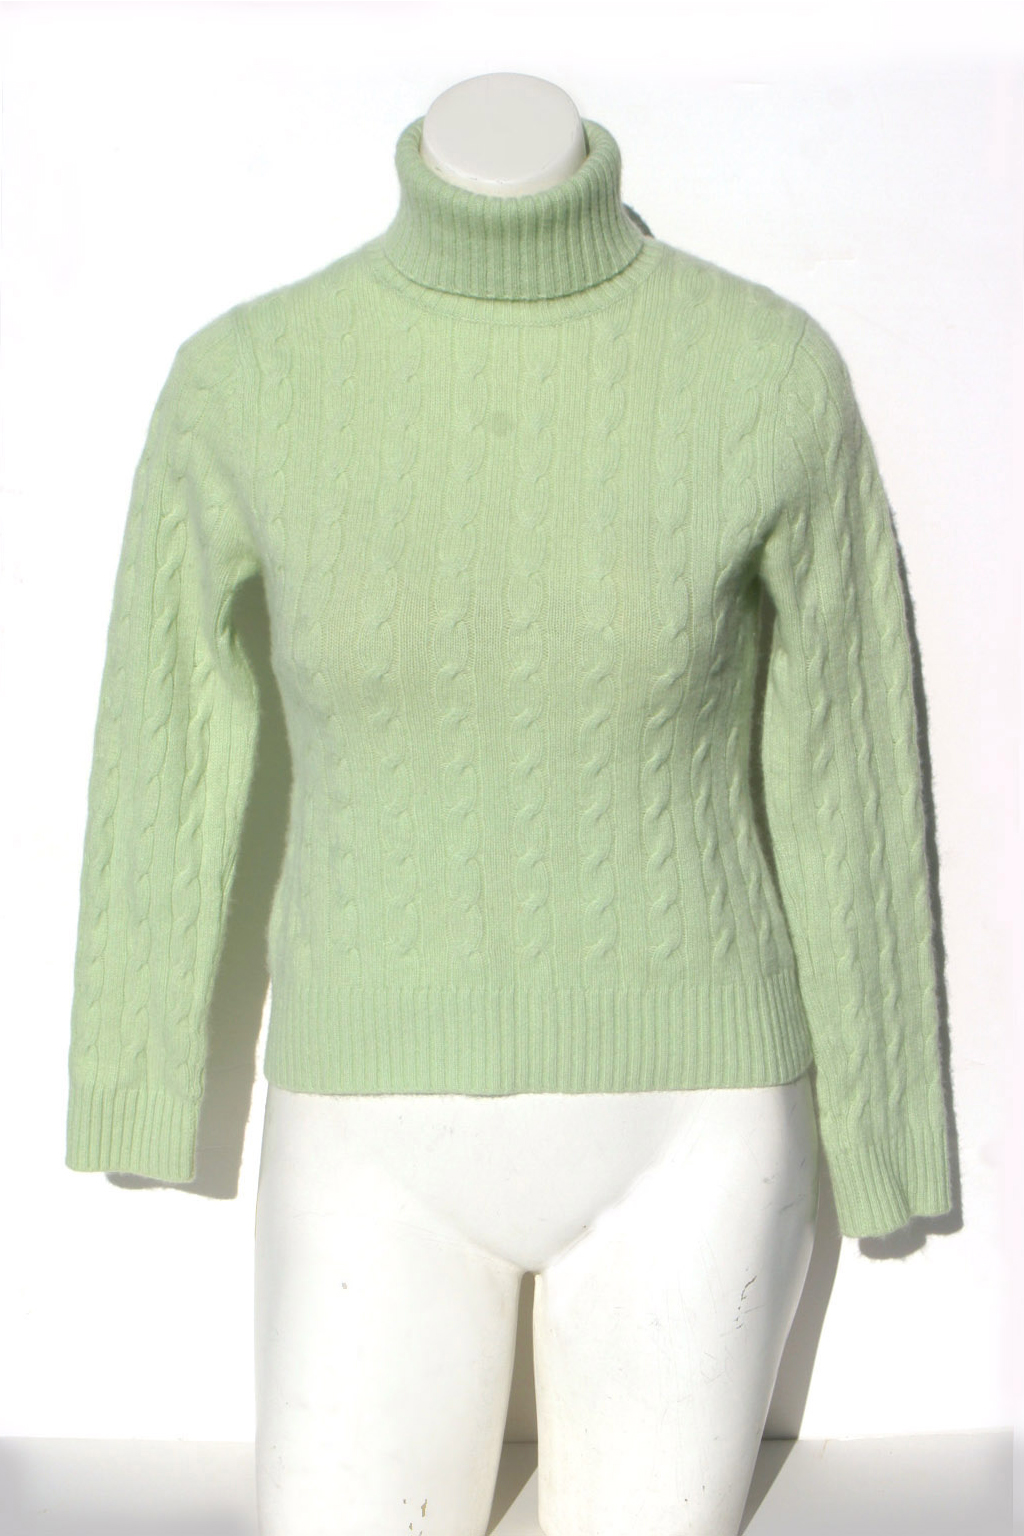 Thrift Shop Sweater Second Hand L Brand Womens Medium Cable Knit Green Turtleneck Cashmere